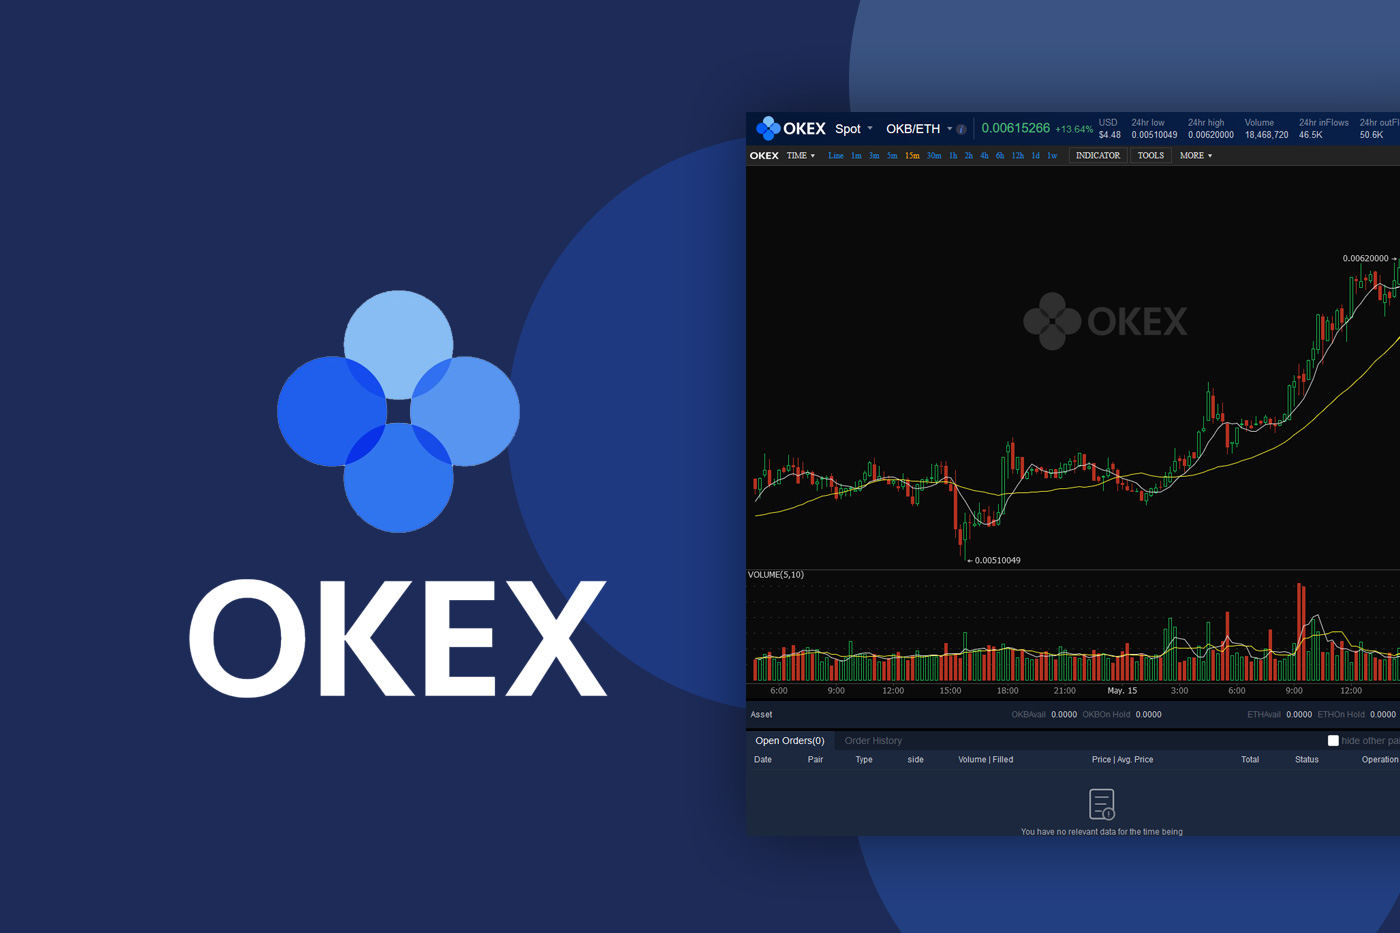 okex-review